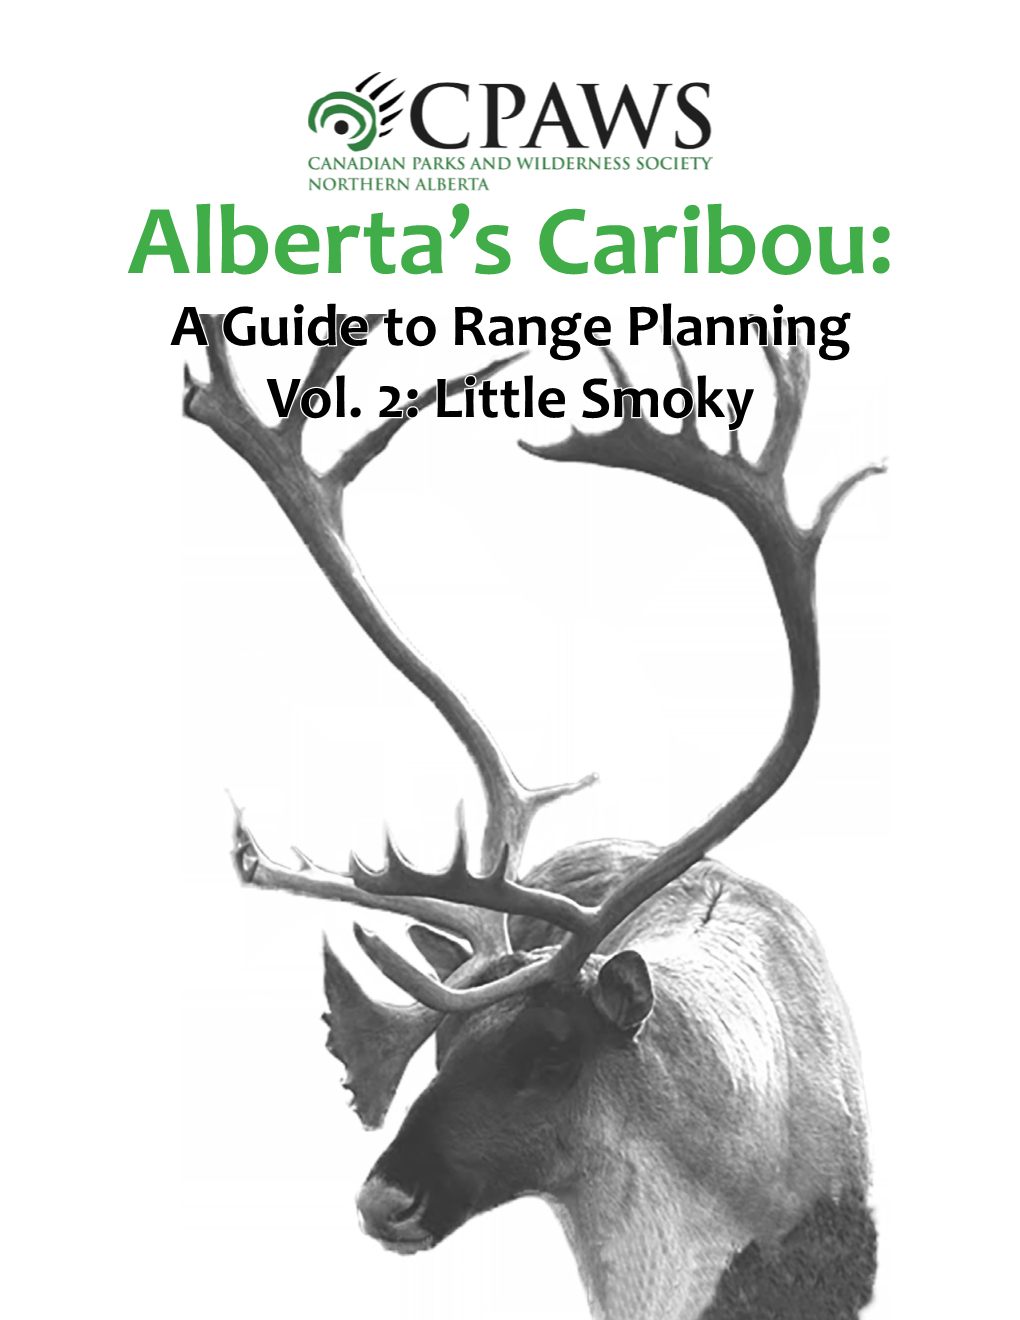 A Guide to Range Planning Vol. 2: Little Smoky Alberta’S Caribou: a Guide to Range Planning Vol